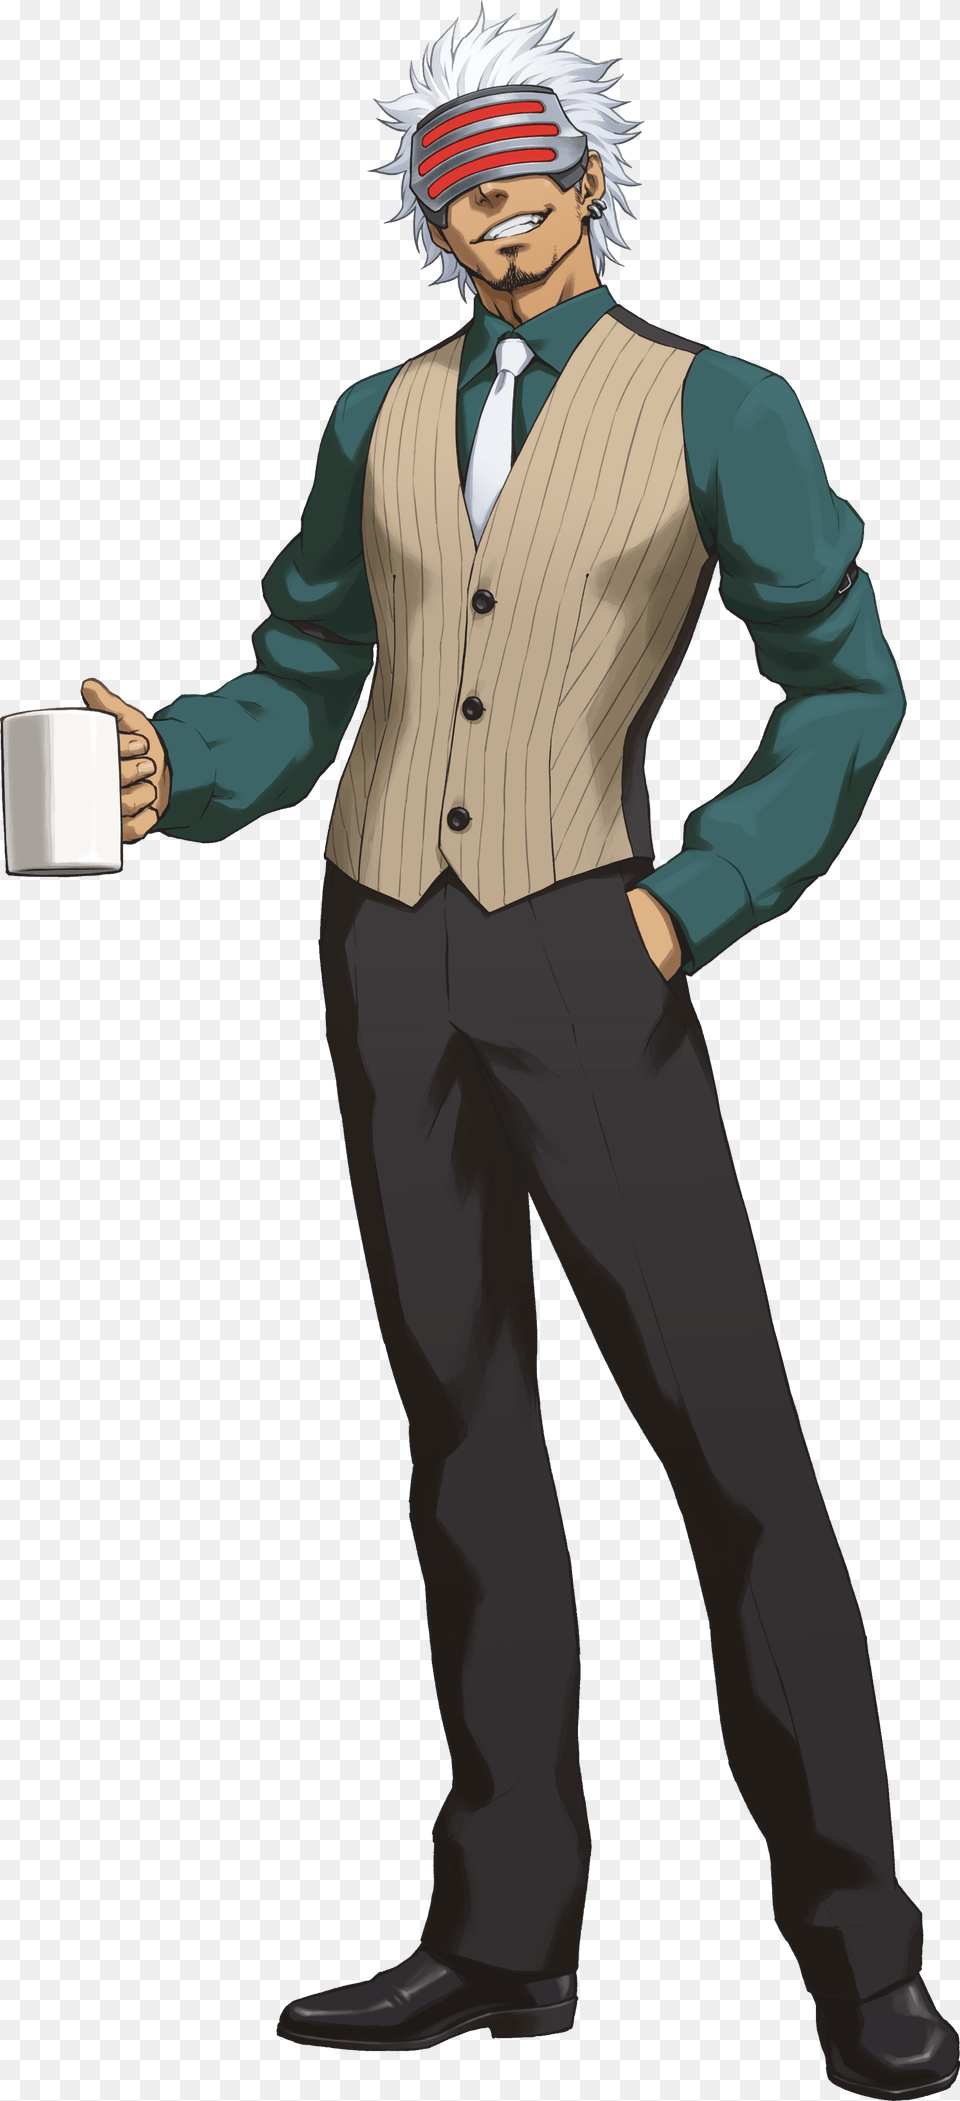 Phoenix Wright Ace Attorney Godot, Clothing, Formal Wear, Suit, Male Png Image